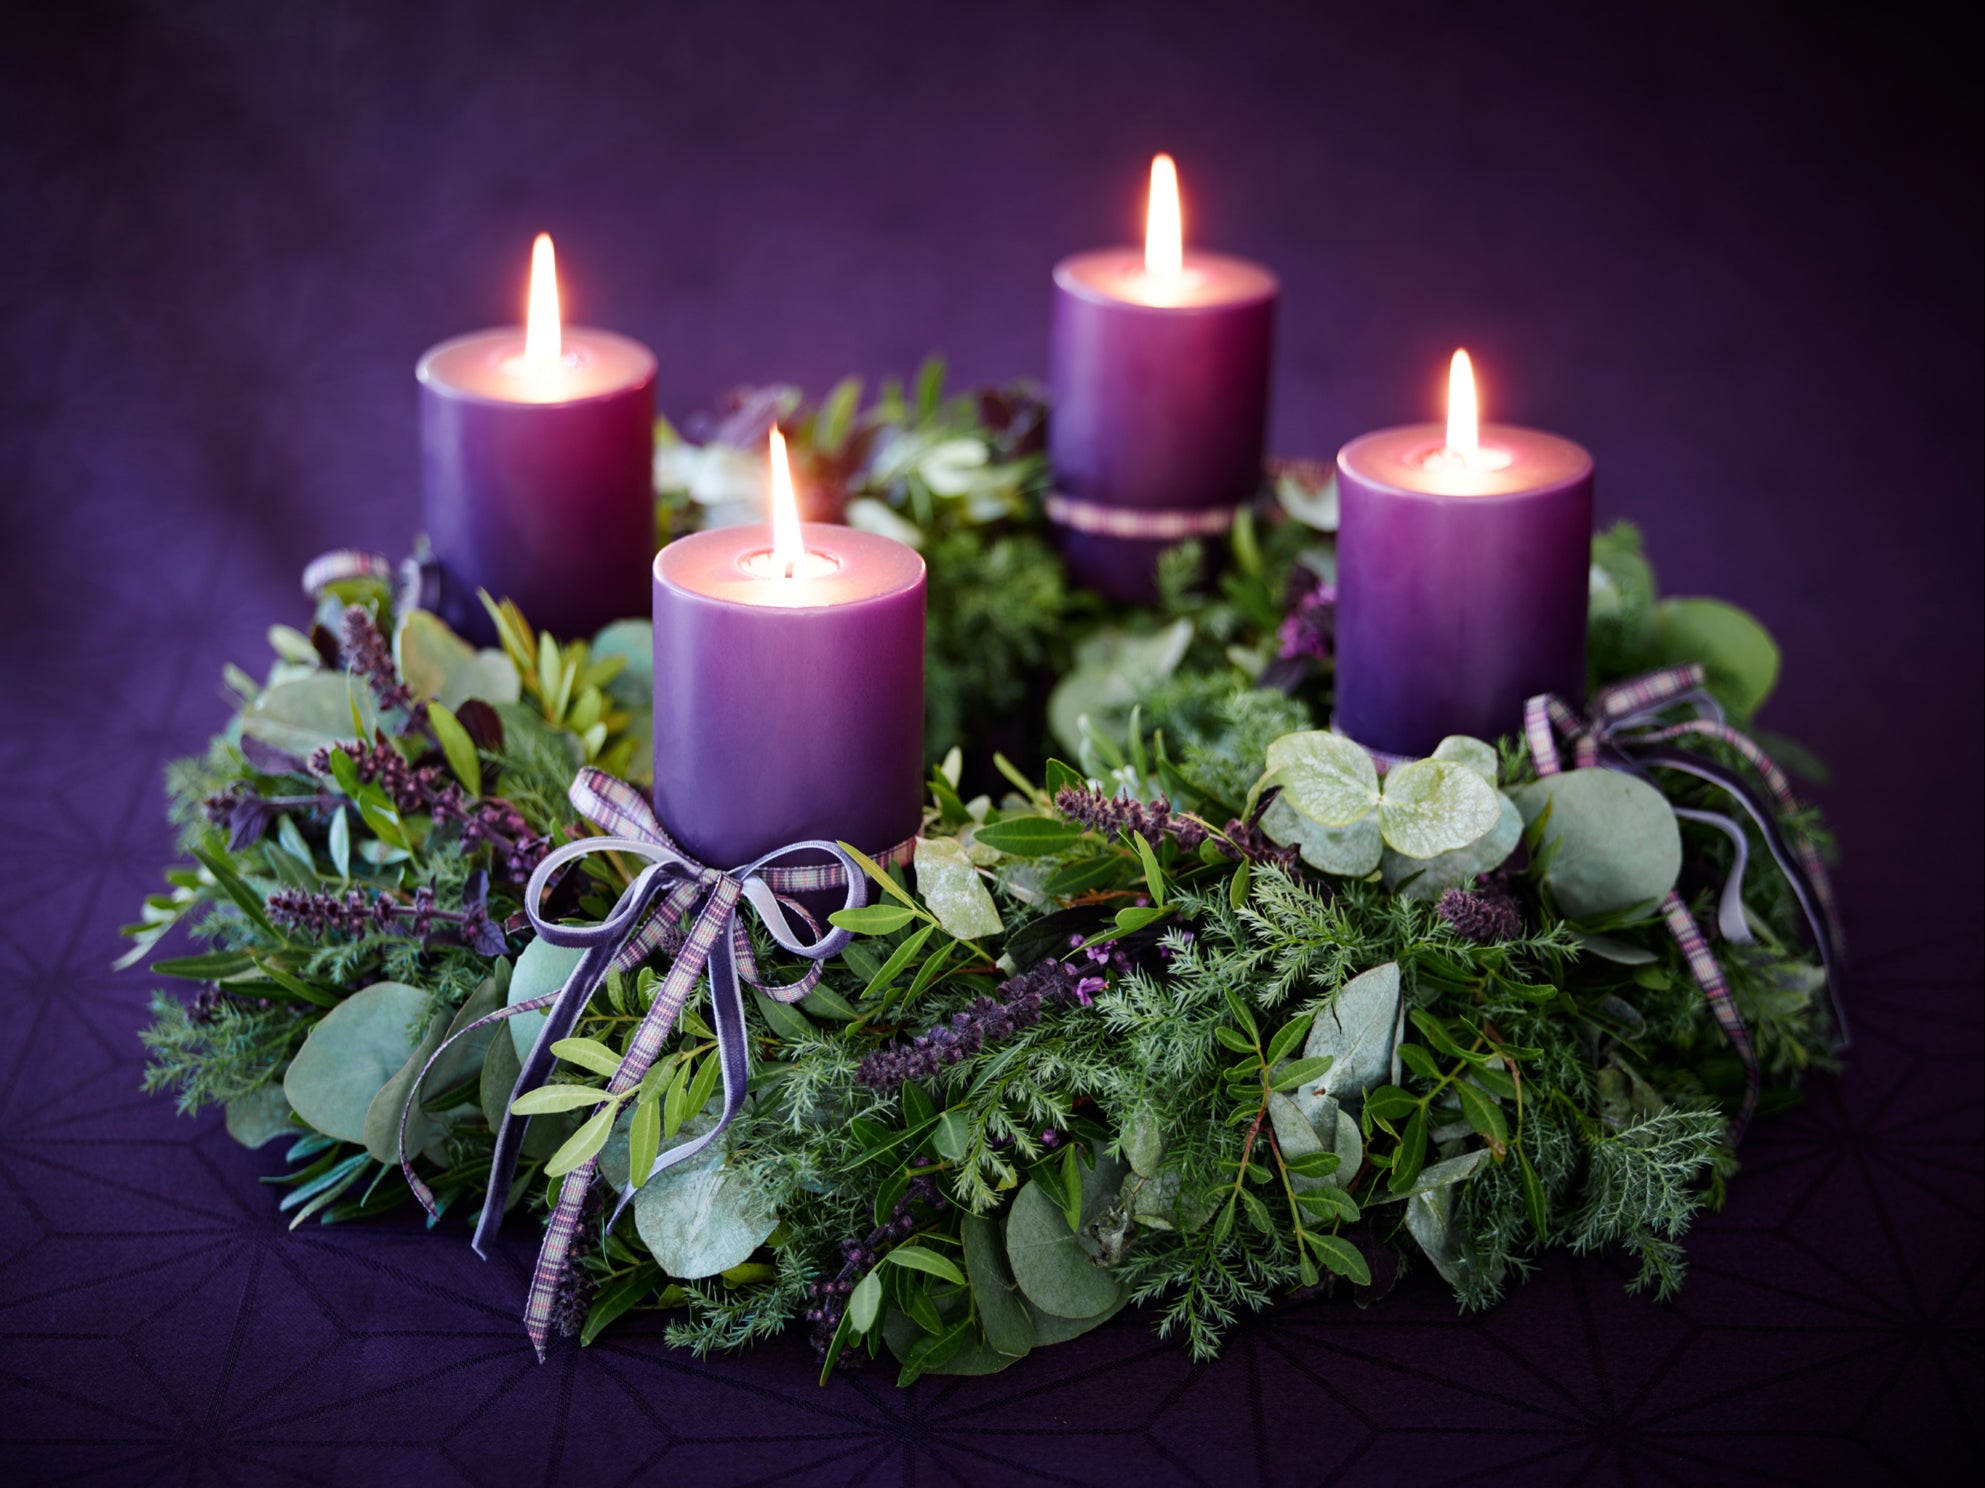 An Advent wreath is a traditional part of Advent Sunday